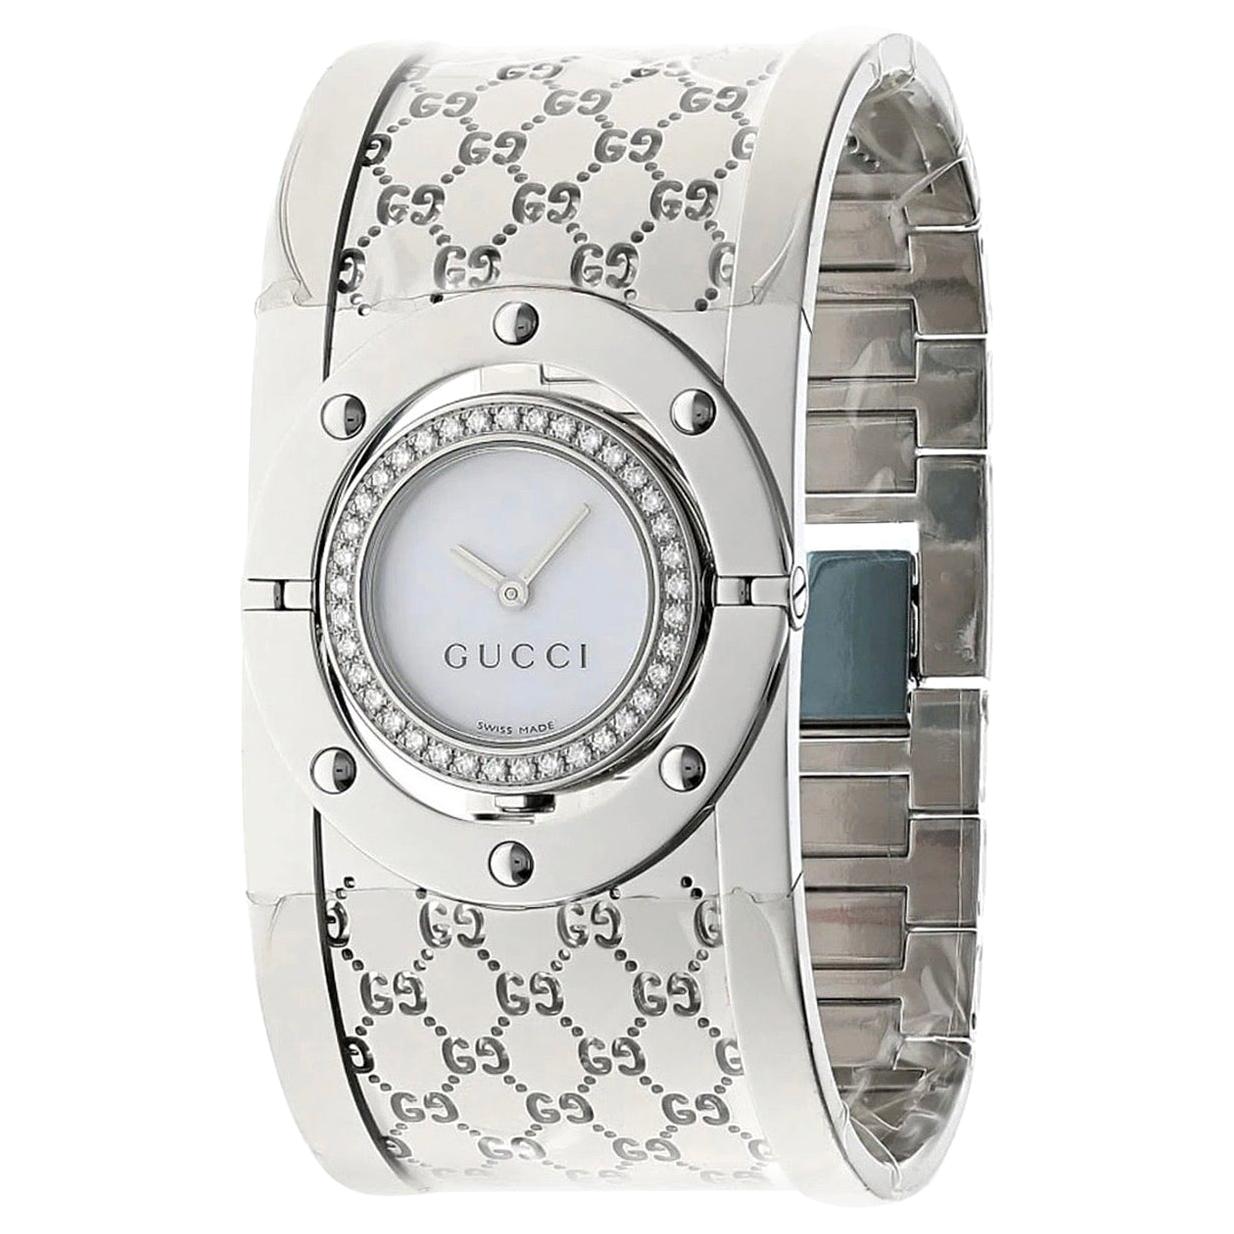 Gucci Jewelry & Watches for Women | Neiman Marcus